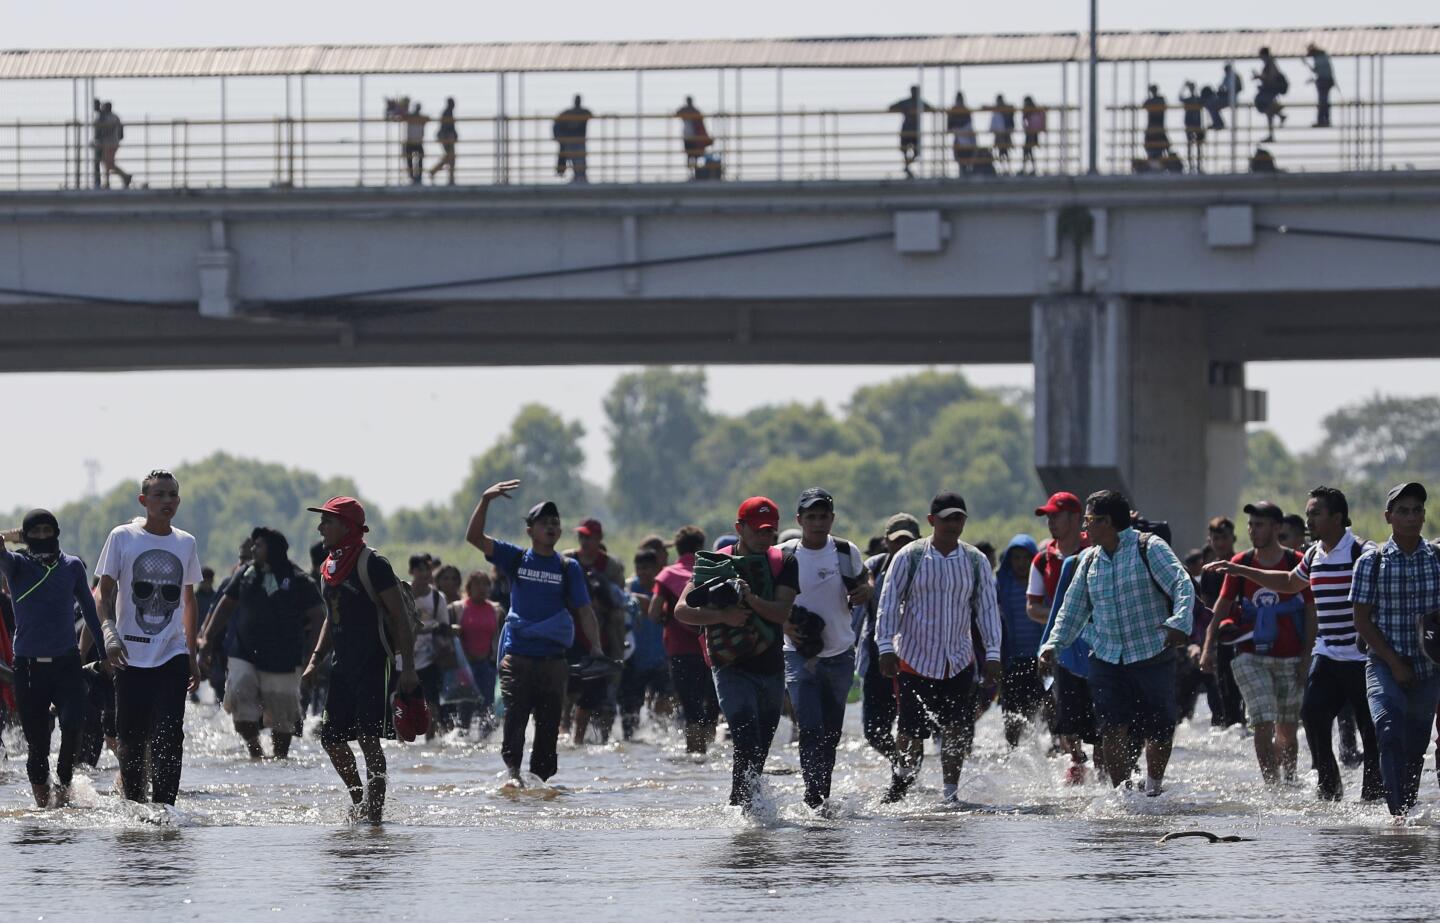 Central American migrants wade across the Suchiate River from Guatemala to Mexico as others stand on the legal border crossing bridge, near Ciudad Hidalgo, Mexico.